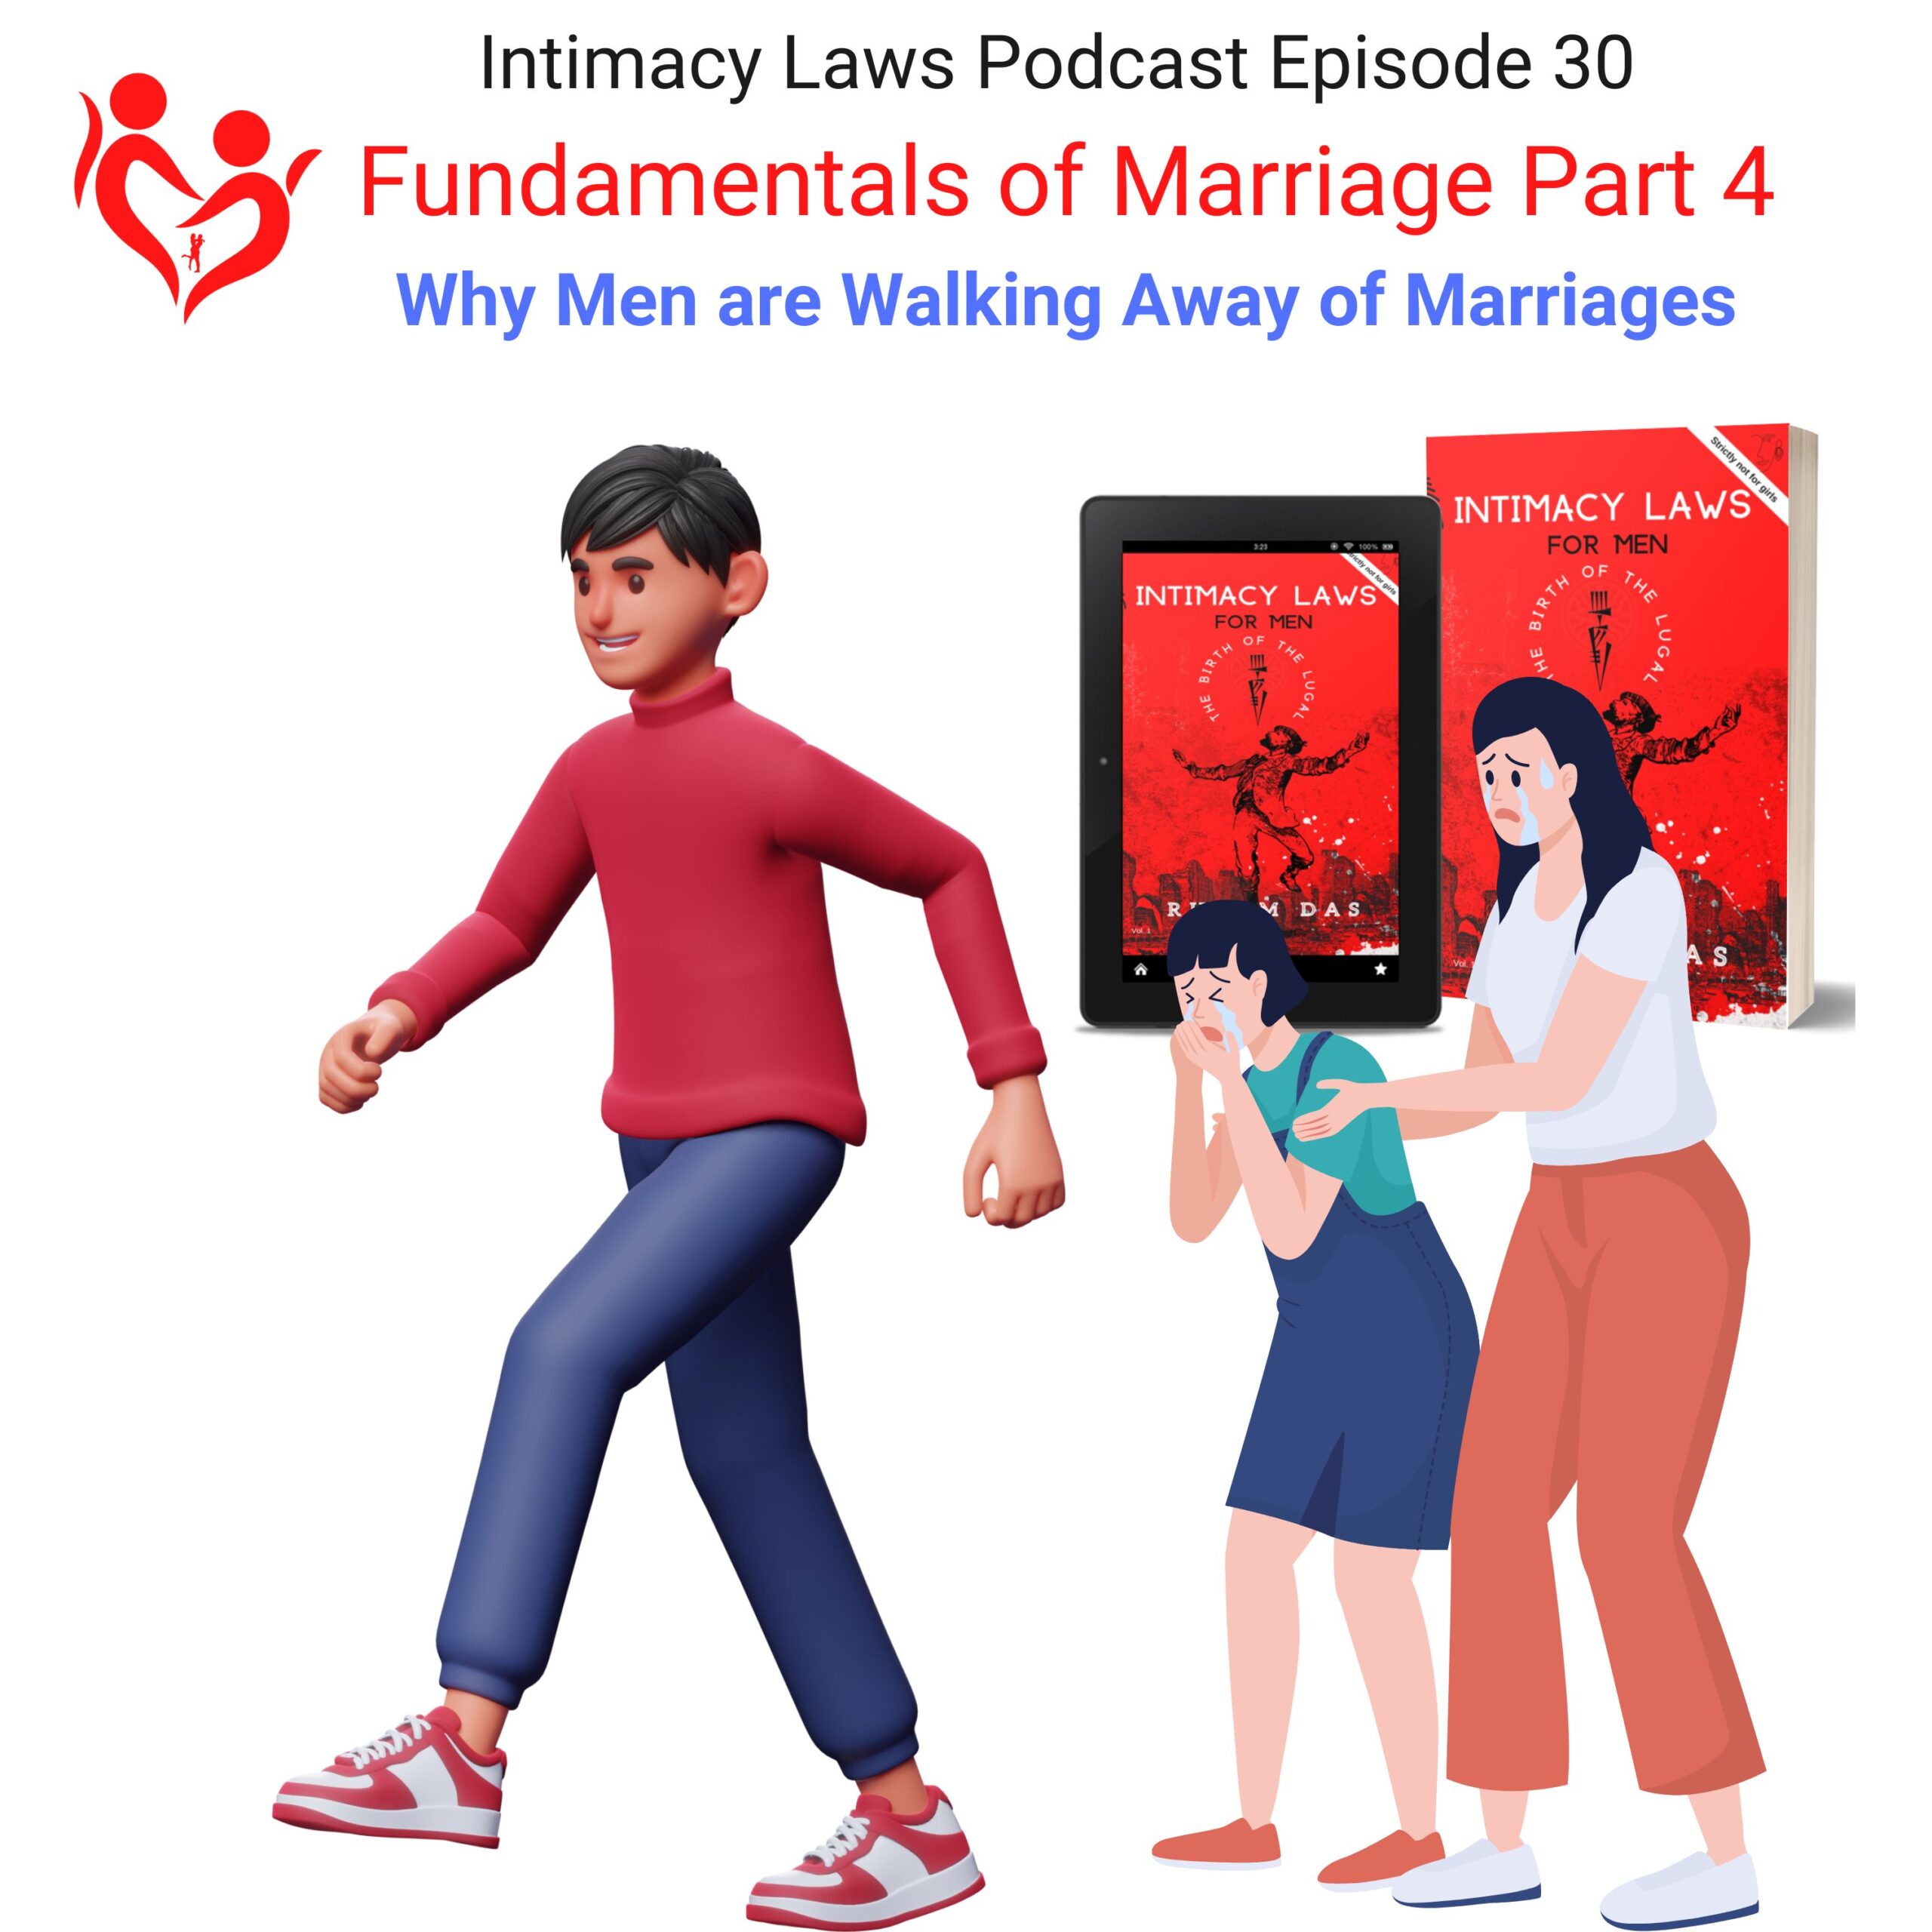 Intimacy Laws Podcast Episode 30 Fundamentals of Marriage Part 4 Why Men are Walking Away of Marriages